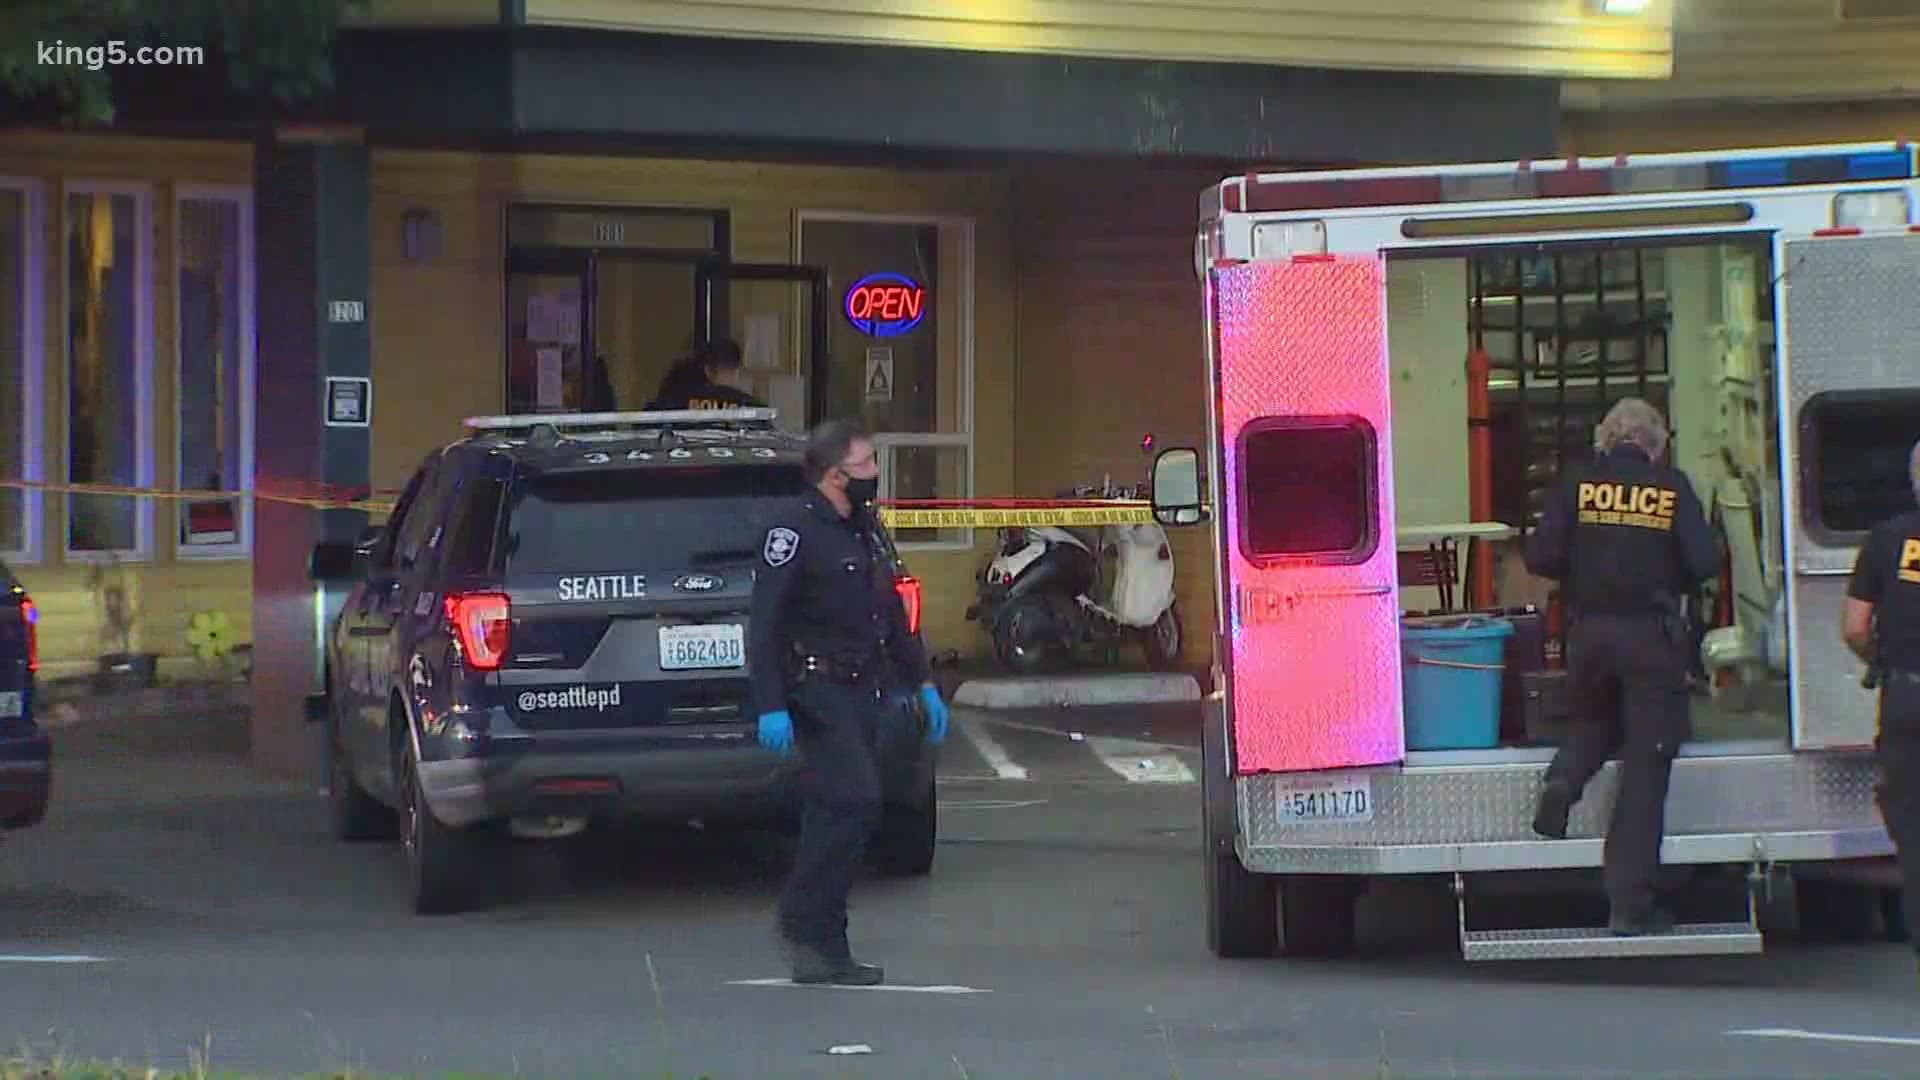 A man was shot inside the lobby of the Everspring Inn on Aurora Ave. in Seattle.  He later died of his injuries.